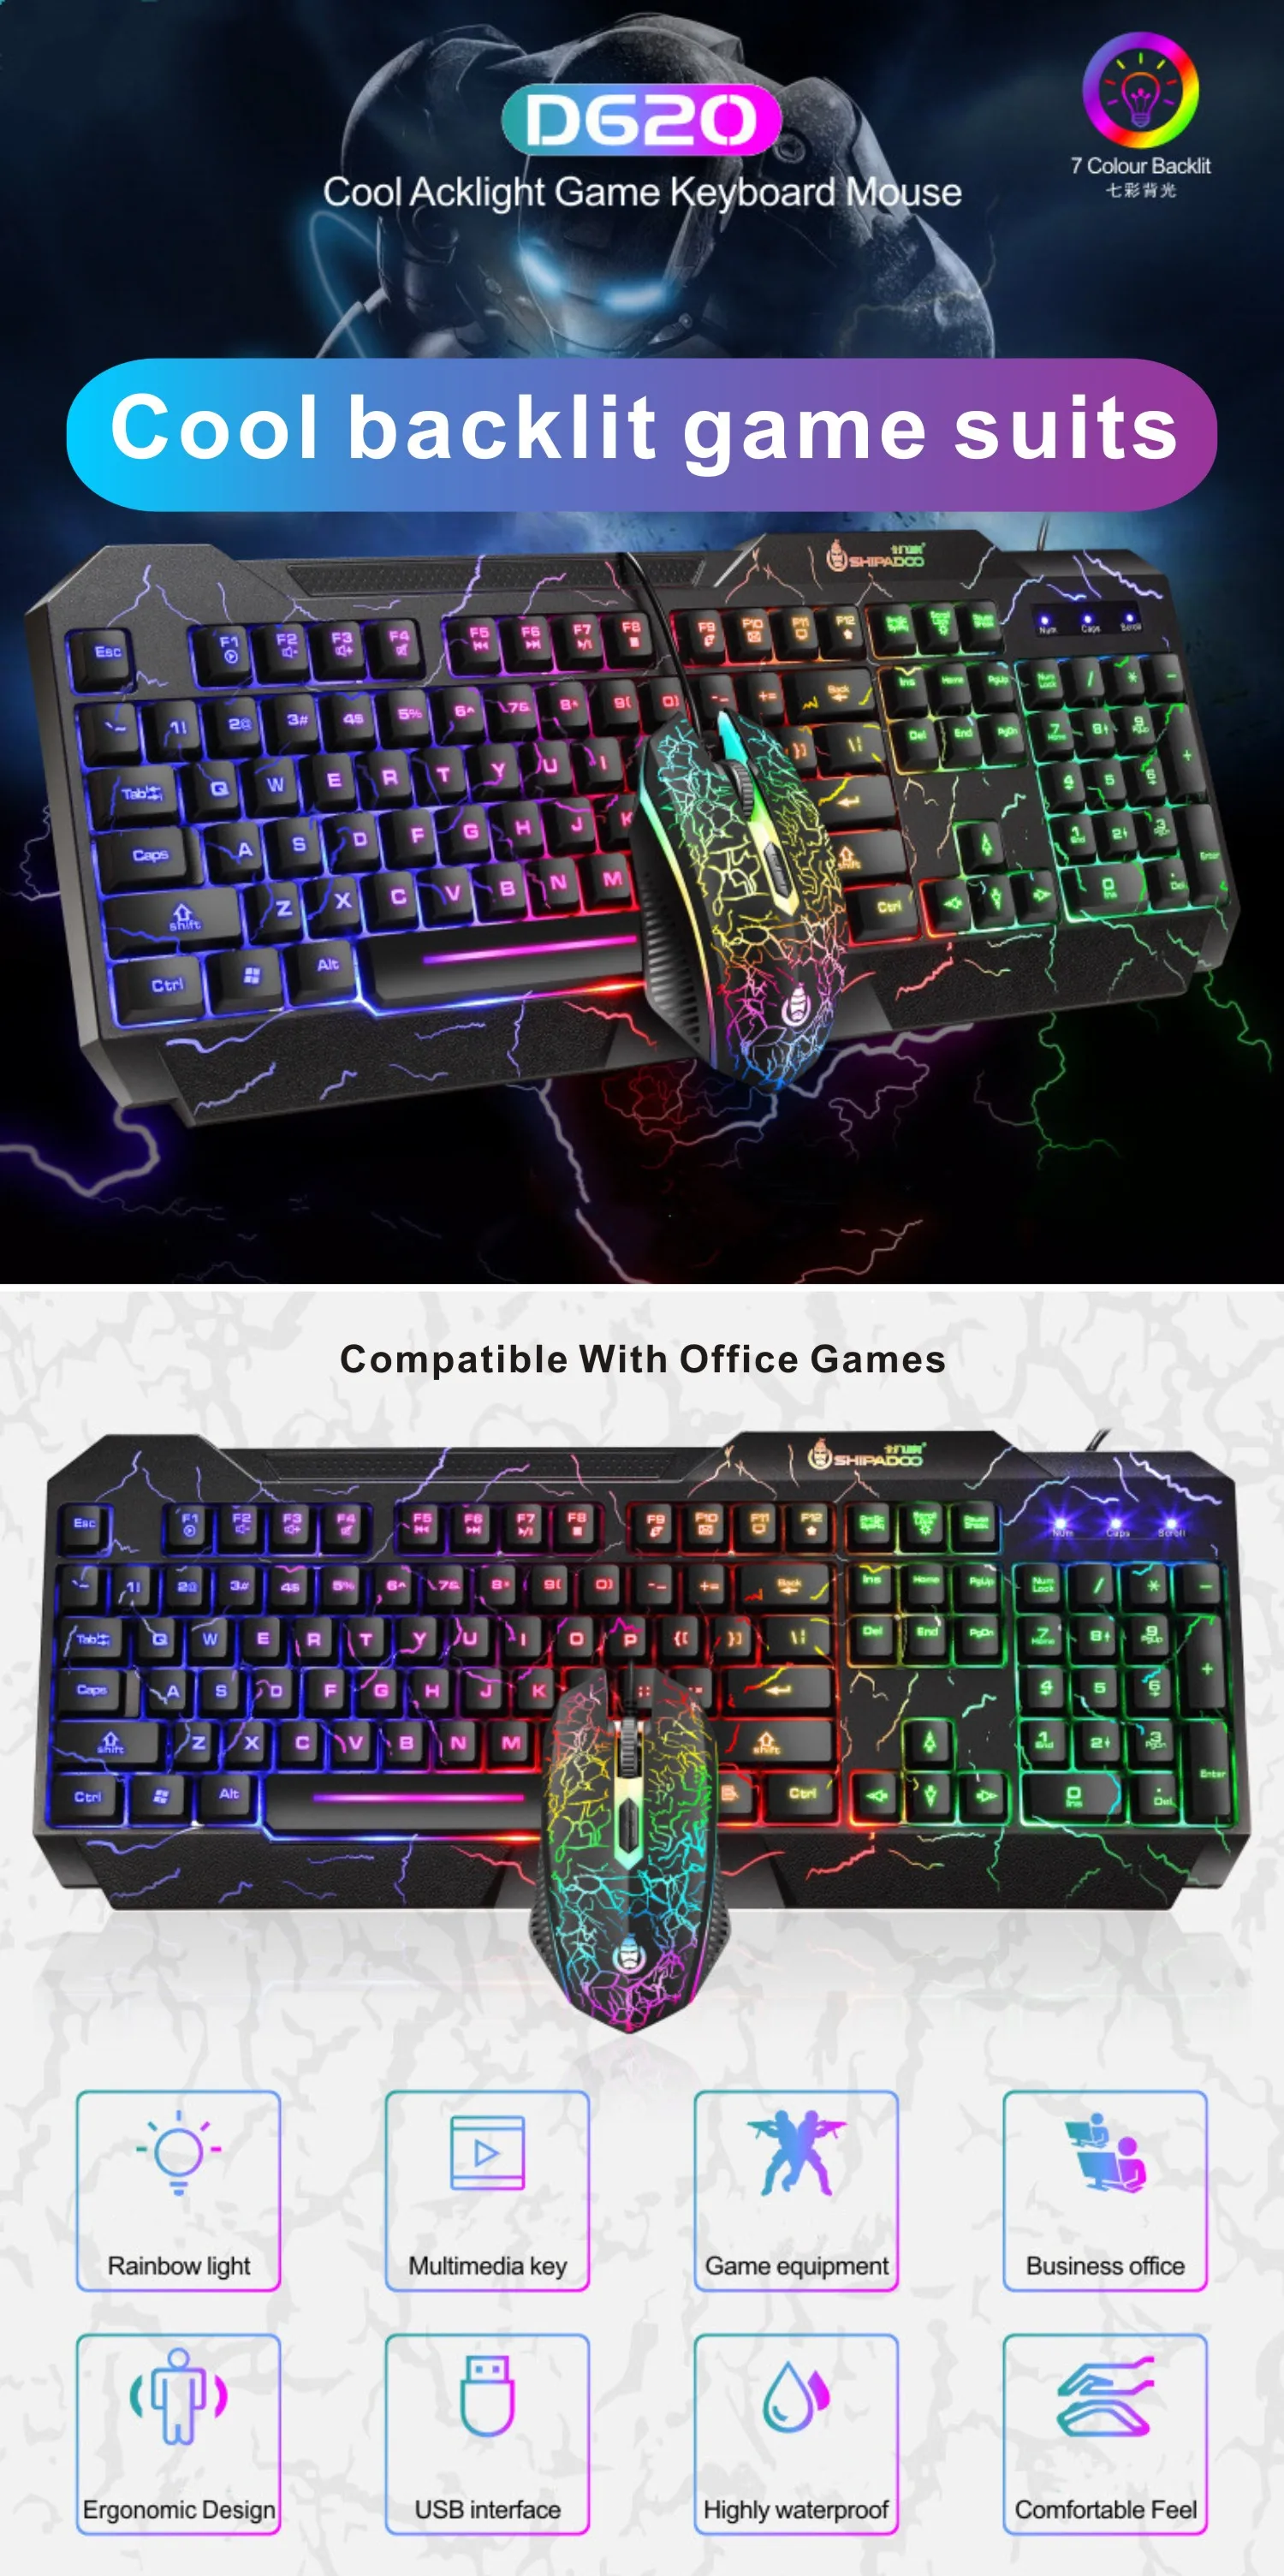 Mouse And Keyboard Set Luminous Anti-Splash USB Wired Mult Function Gaming Keyboard Mouse For Gaming TV Office PC E-Sport CF LOL